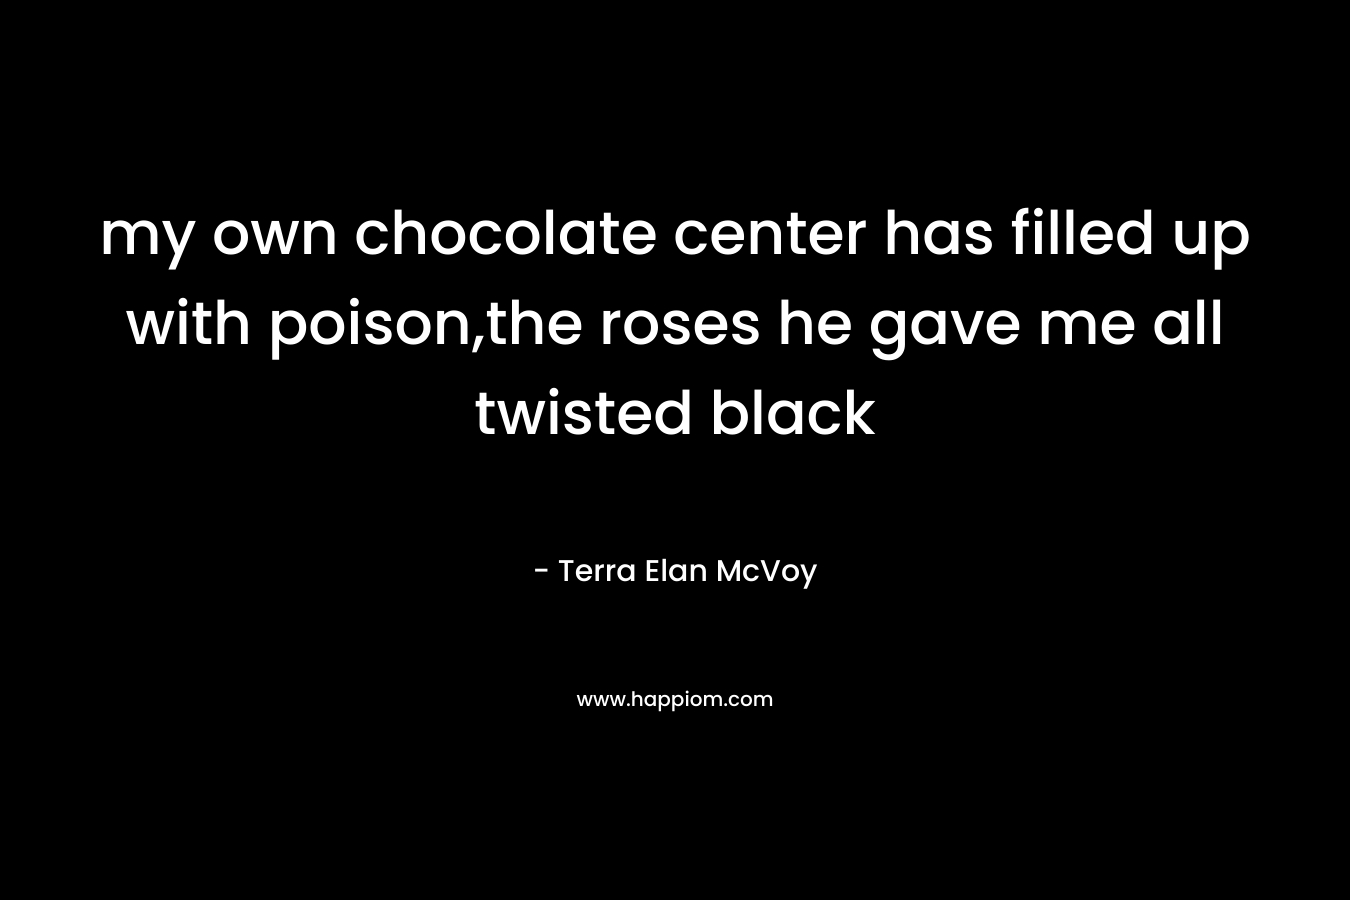 my own chocolate center has filled up with poison,the roses he gave me all twisted black